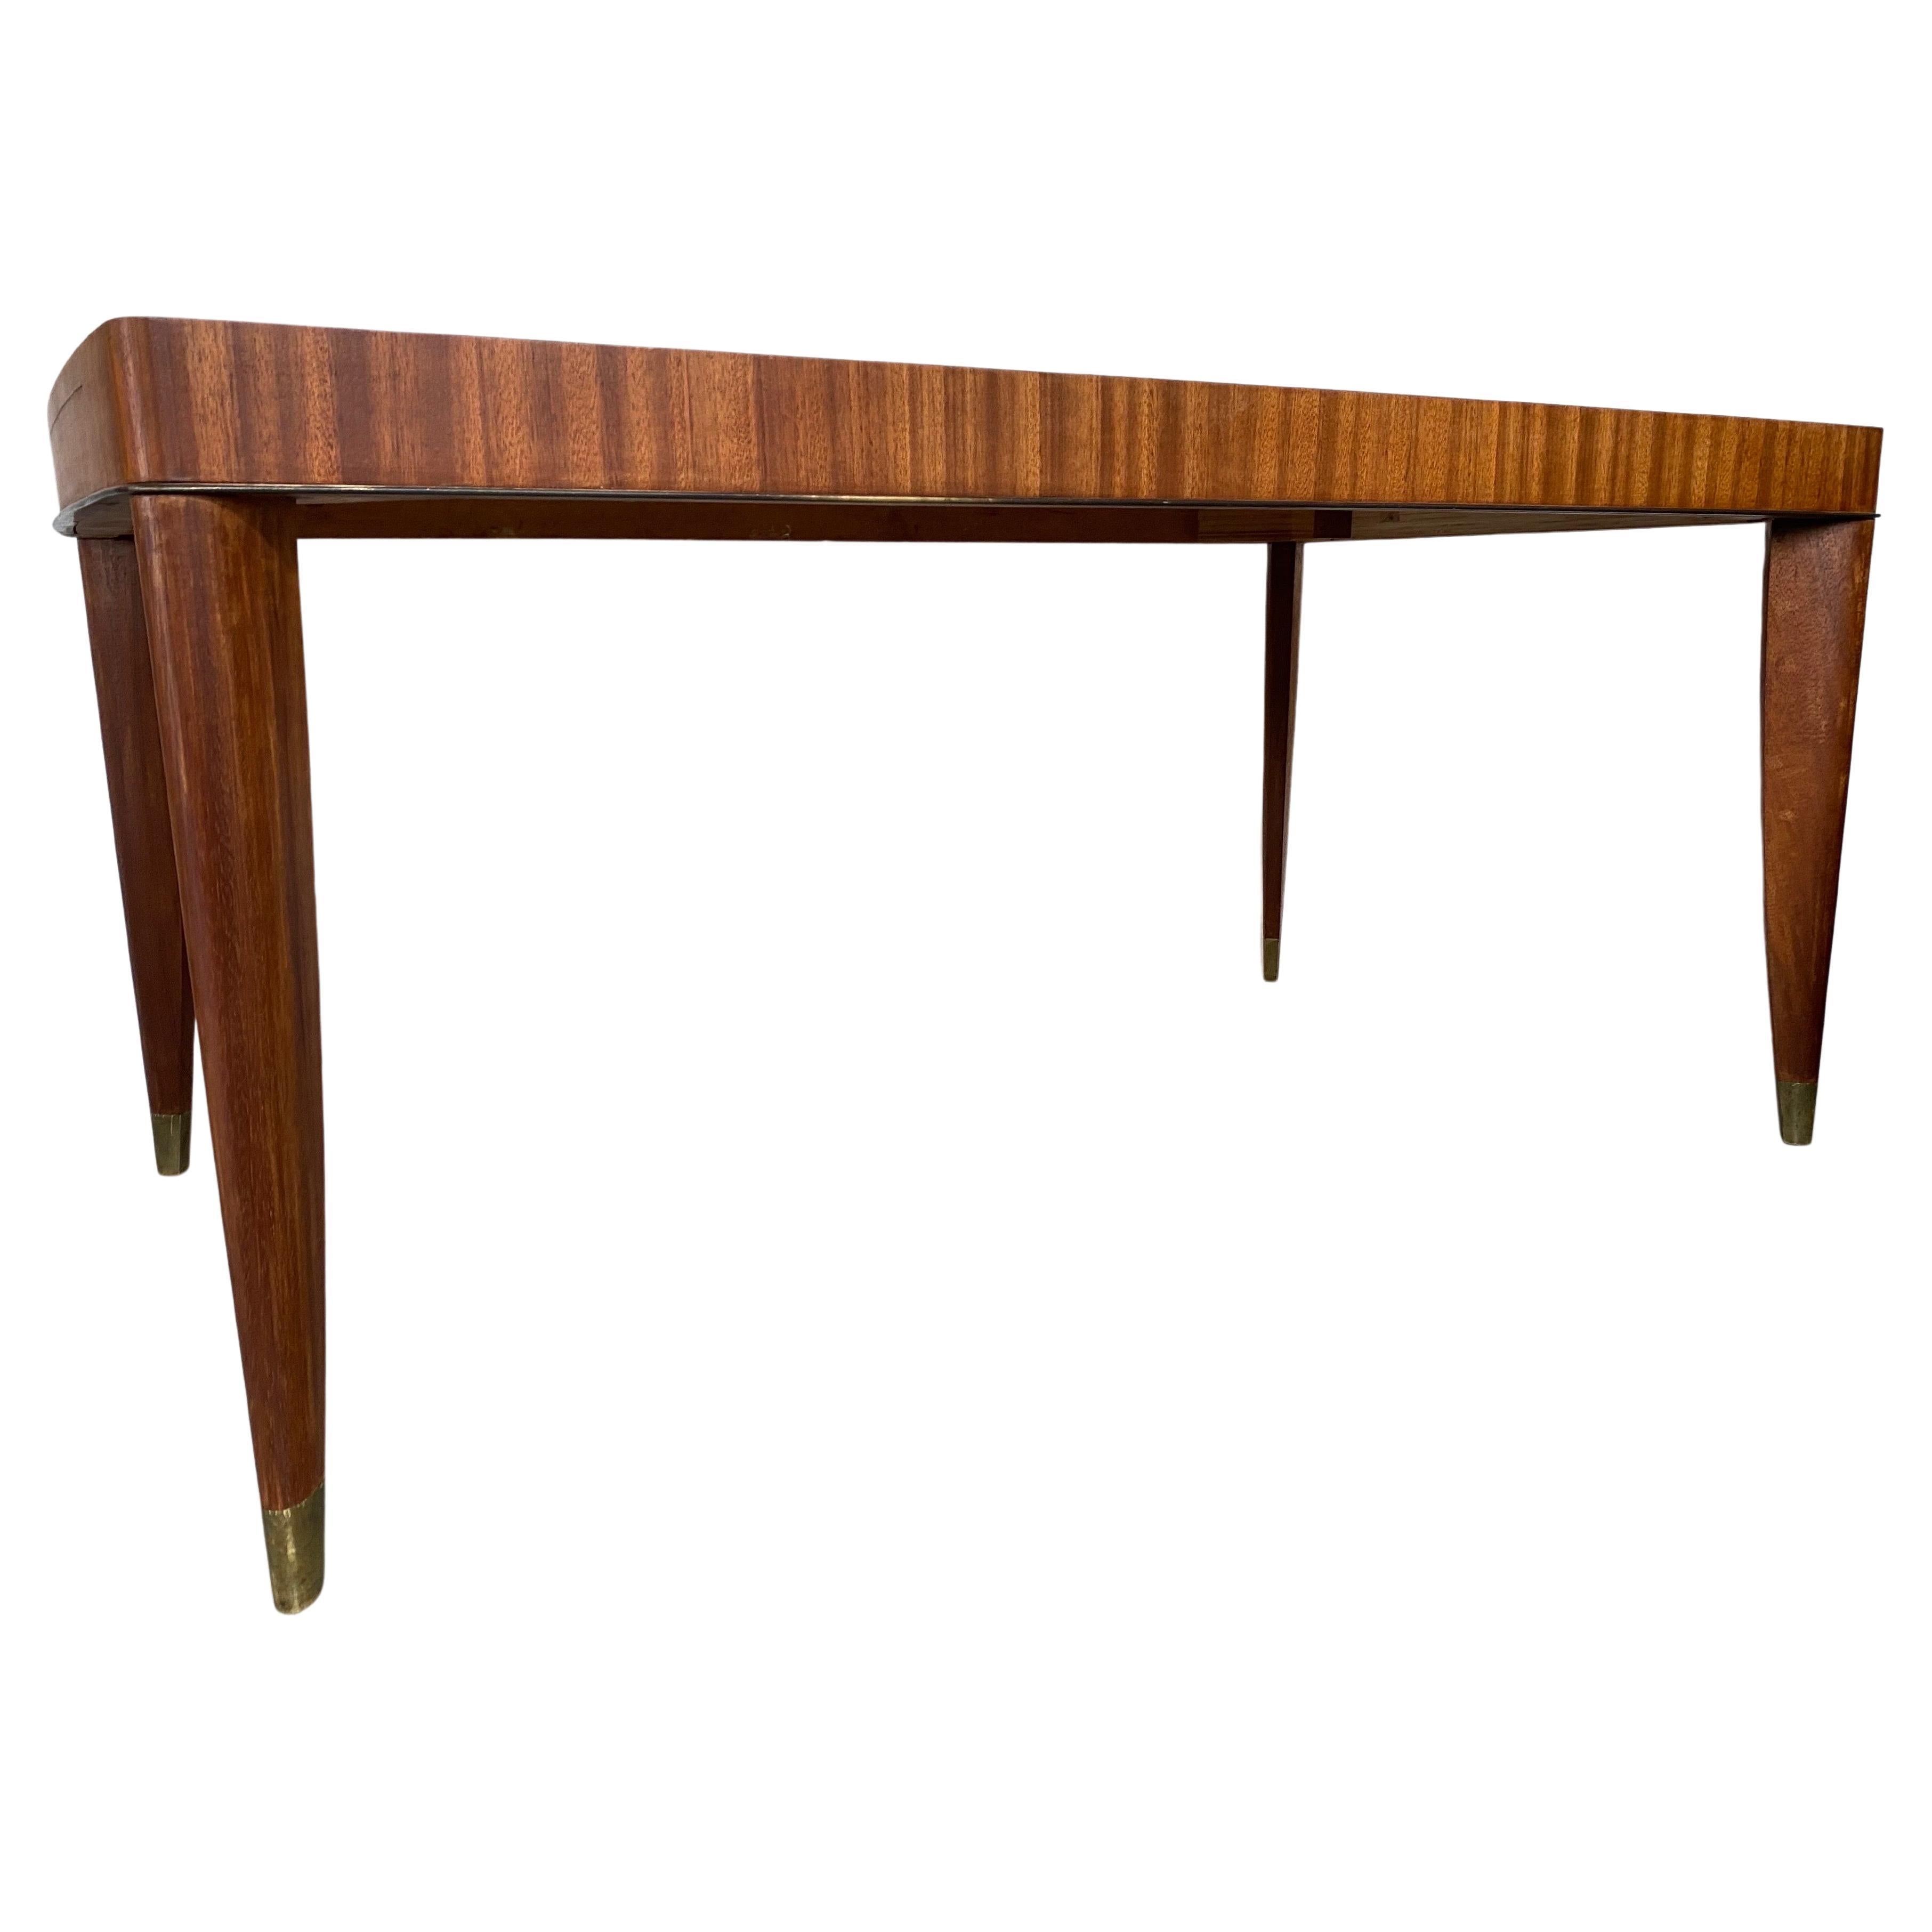 Hand-Crafted De Coene Art Deco Dining Table, 1941 For Sale